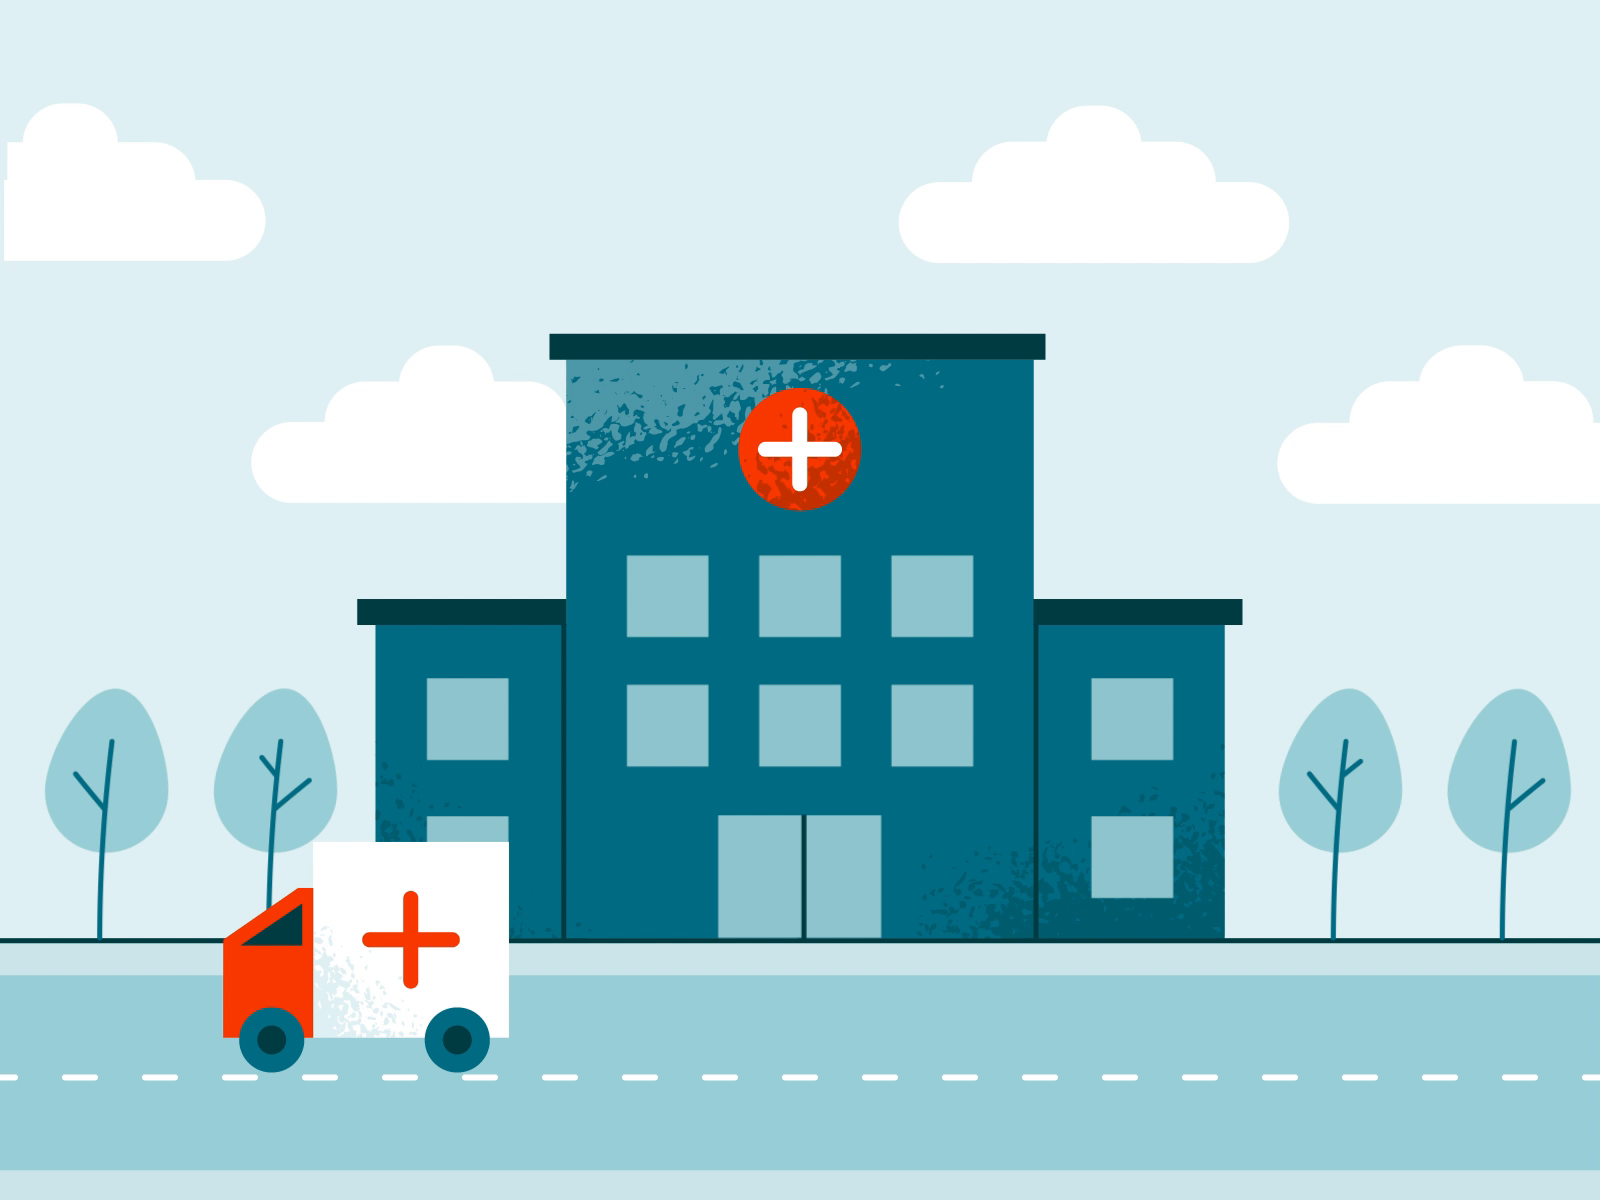 Hospital Animation by Giselle for Siege Media on Dribbble